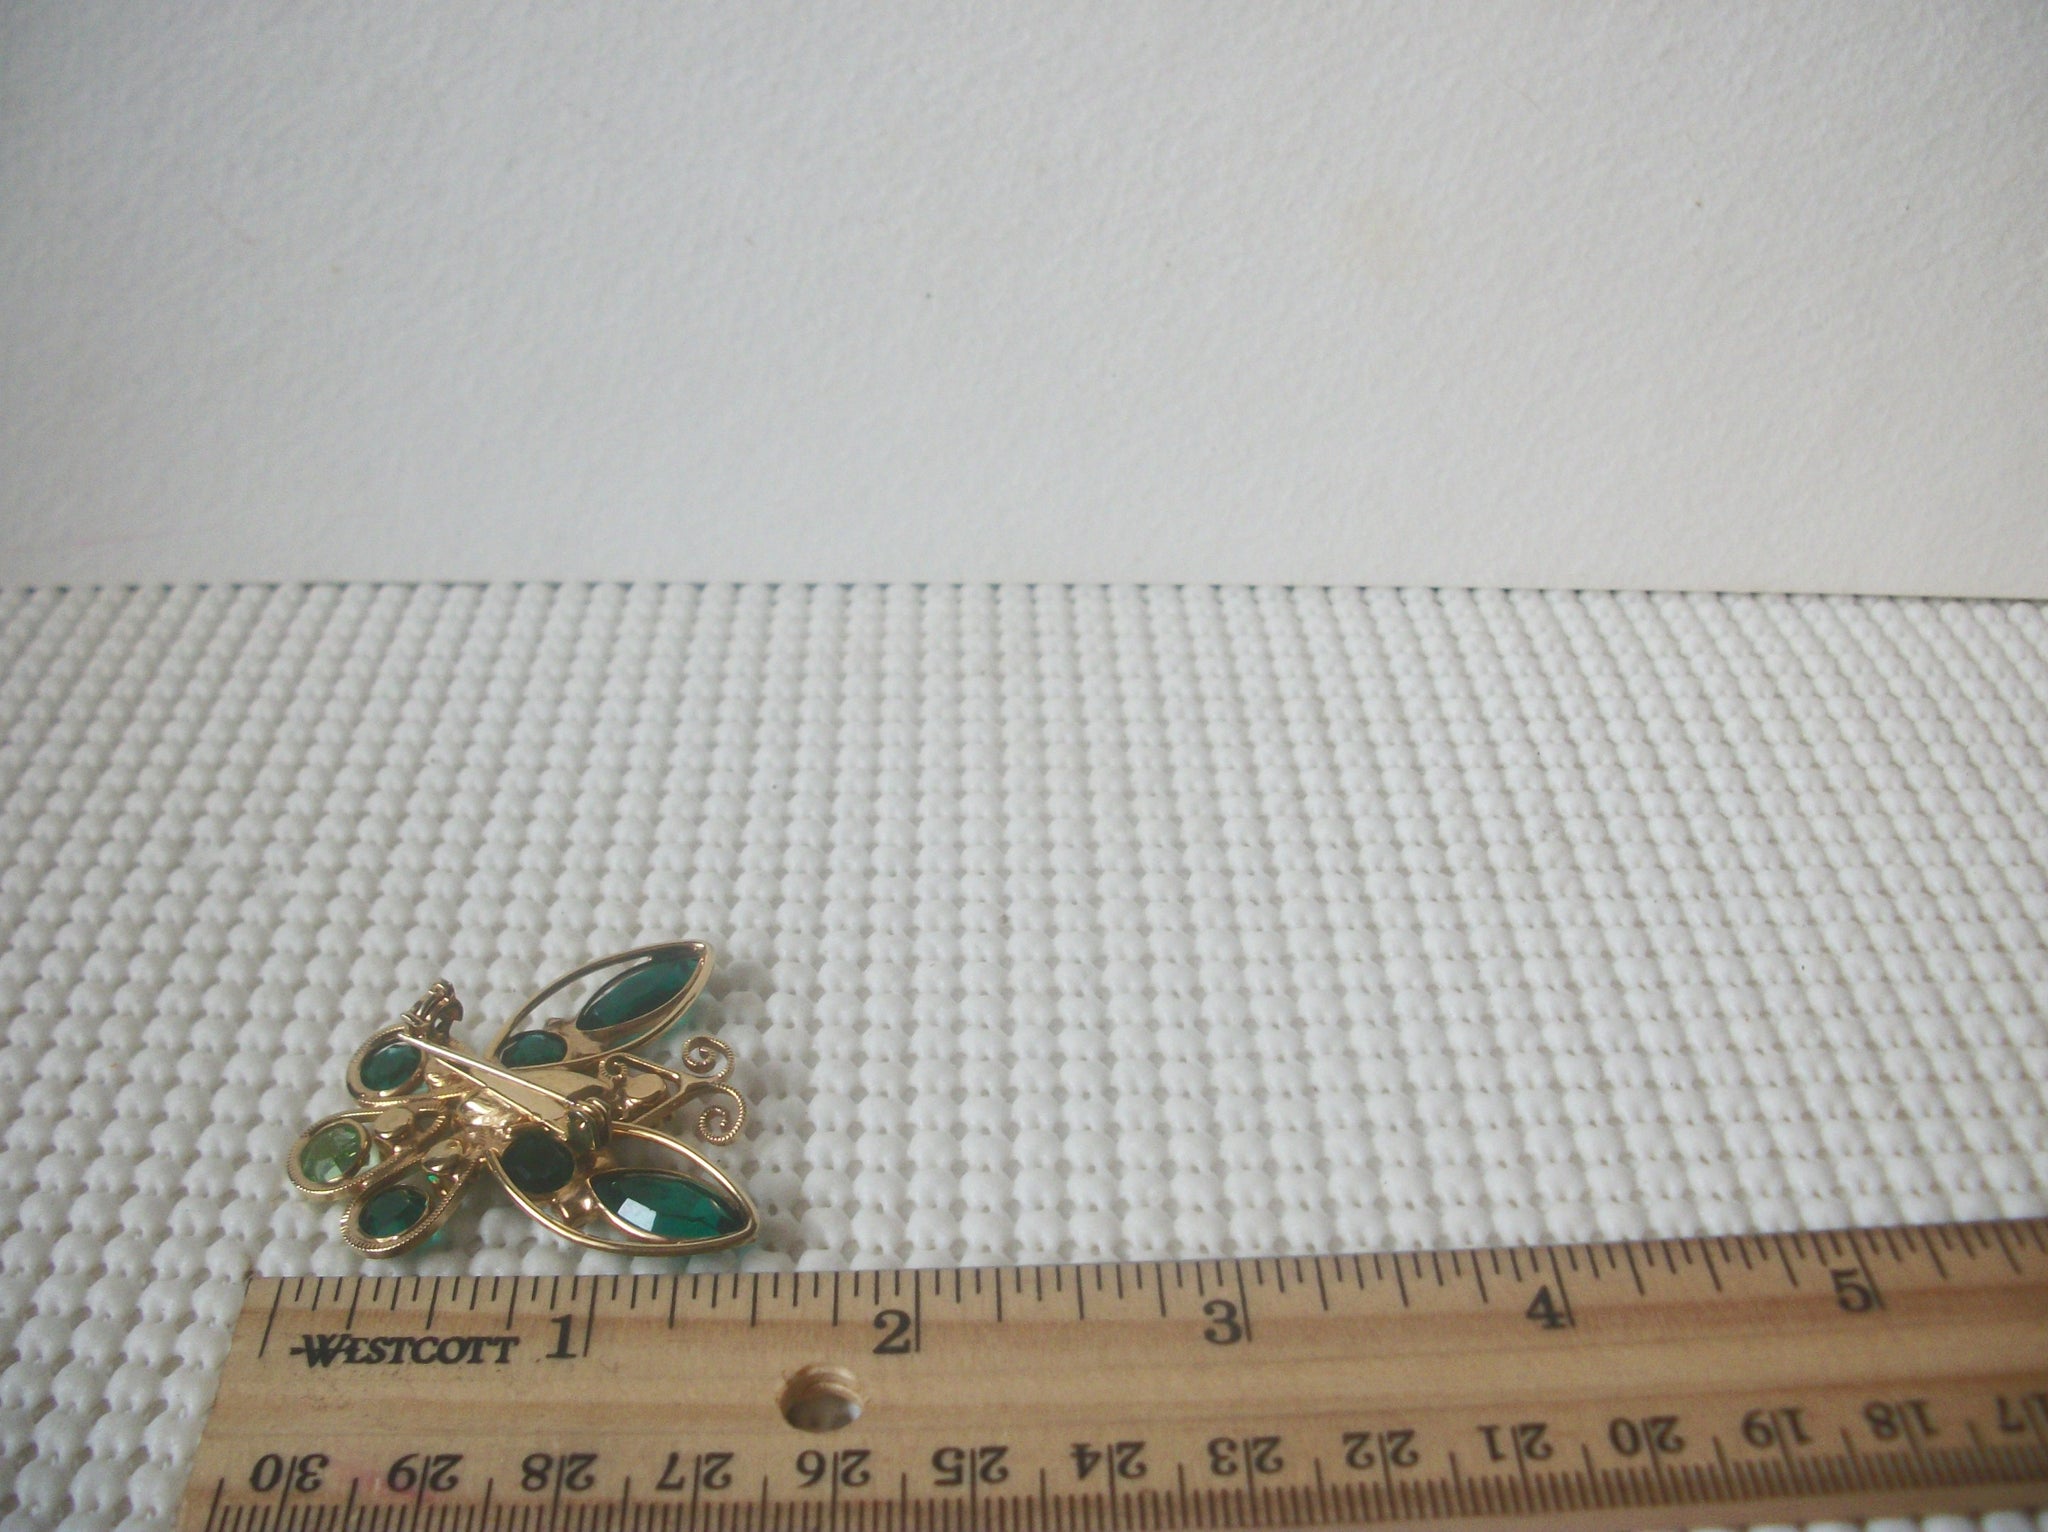 Exquisite Green Emerald Crystals, Rhinestones Glass, Gold Tone, Prong Set, Butterfly Pin Brooch, Vintage 022521